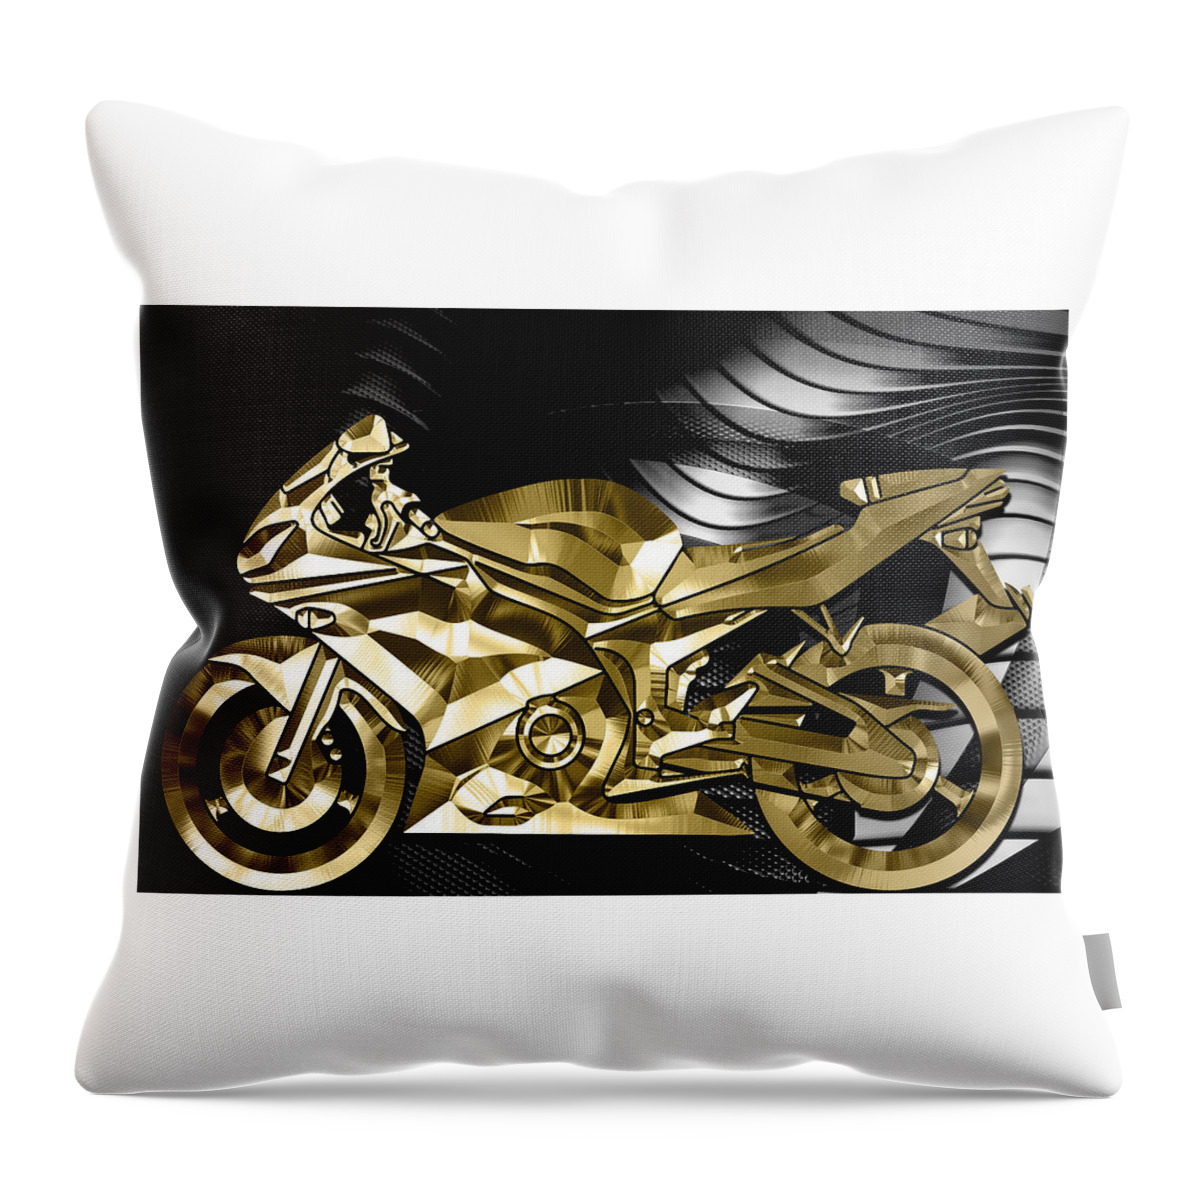 Ninja Throw Pillow featuring the mixed media Ninja Motorcycle Collection by Marvin Blaine